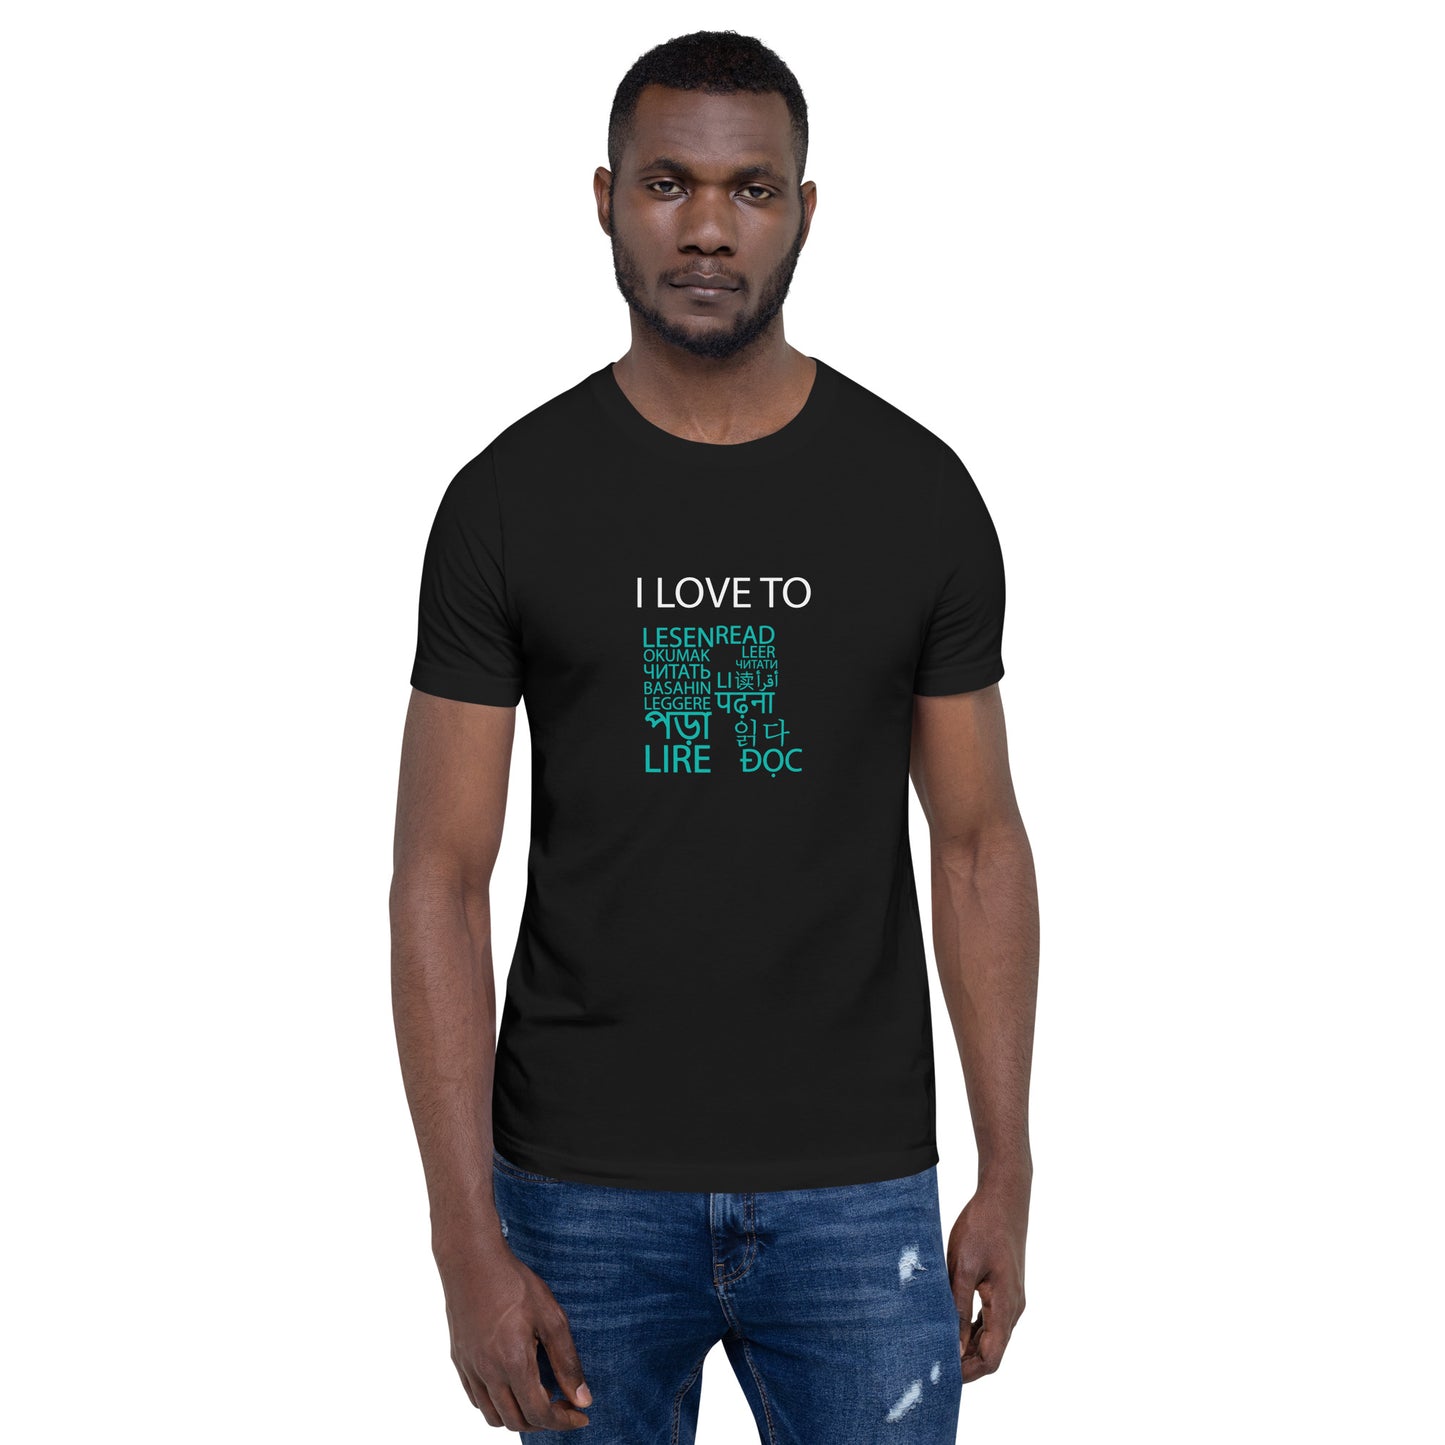 I Love To Read t-shirt.